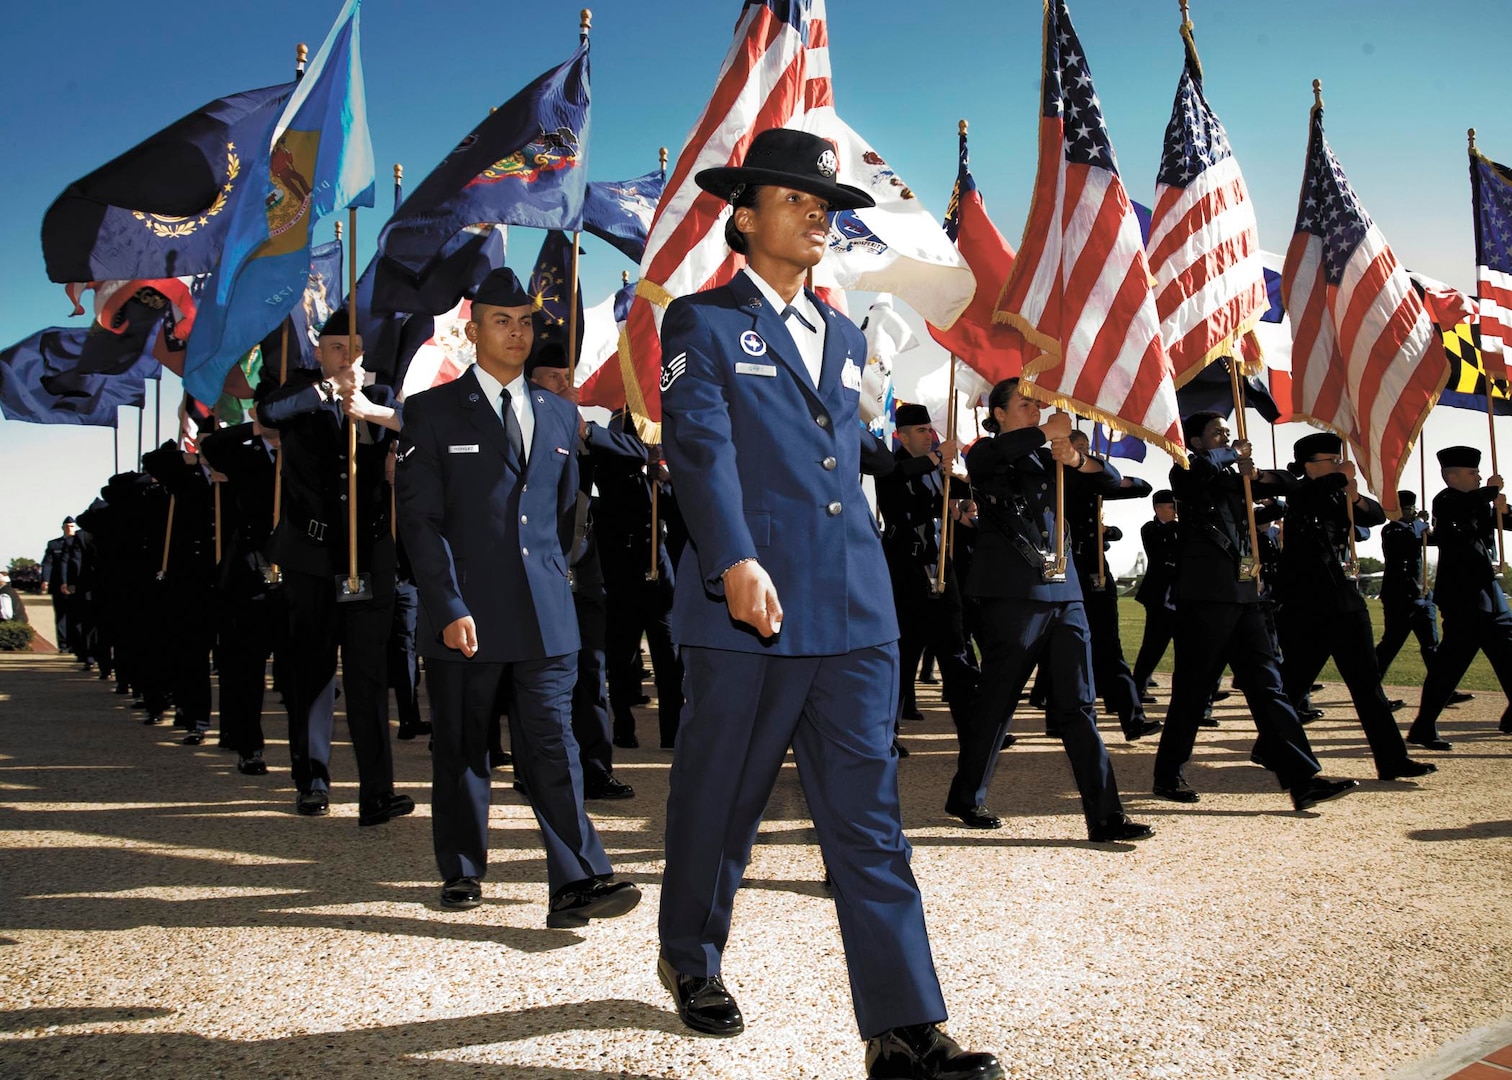 Staff Sgt. Katrevious Swift leads 322nd Training Squadron Flight 287 past the grandstands during Air Force Basic Military Training graduation at Joint Base San Antonio-Lackland April 18. Swift was the flight’s military training instructor team chief.